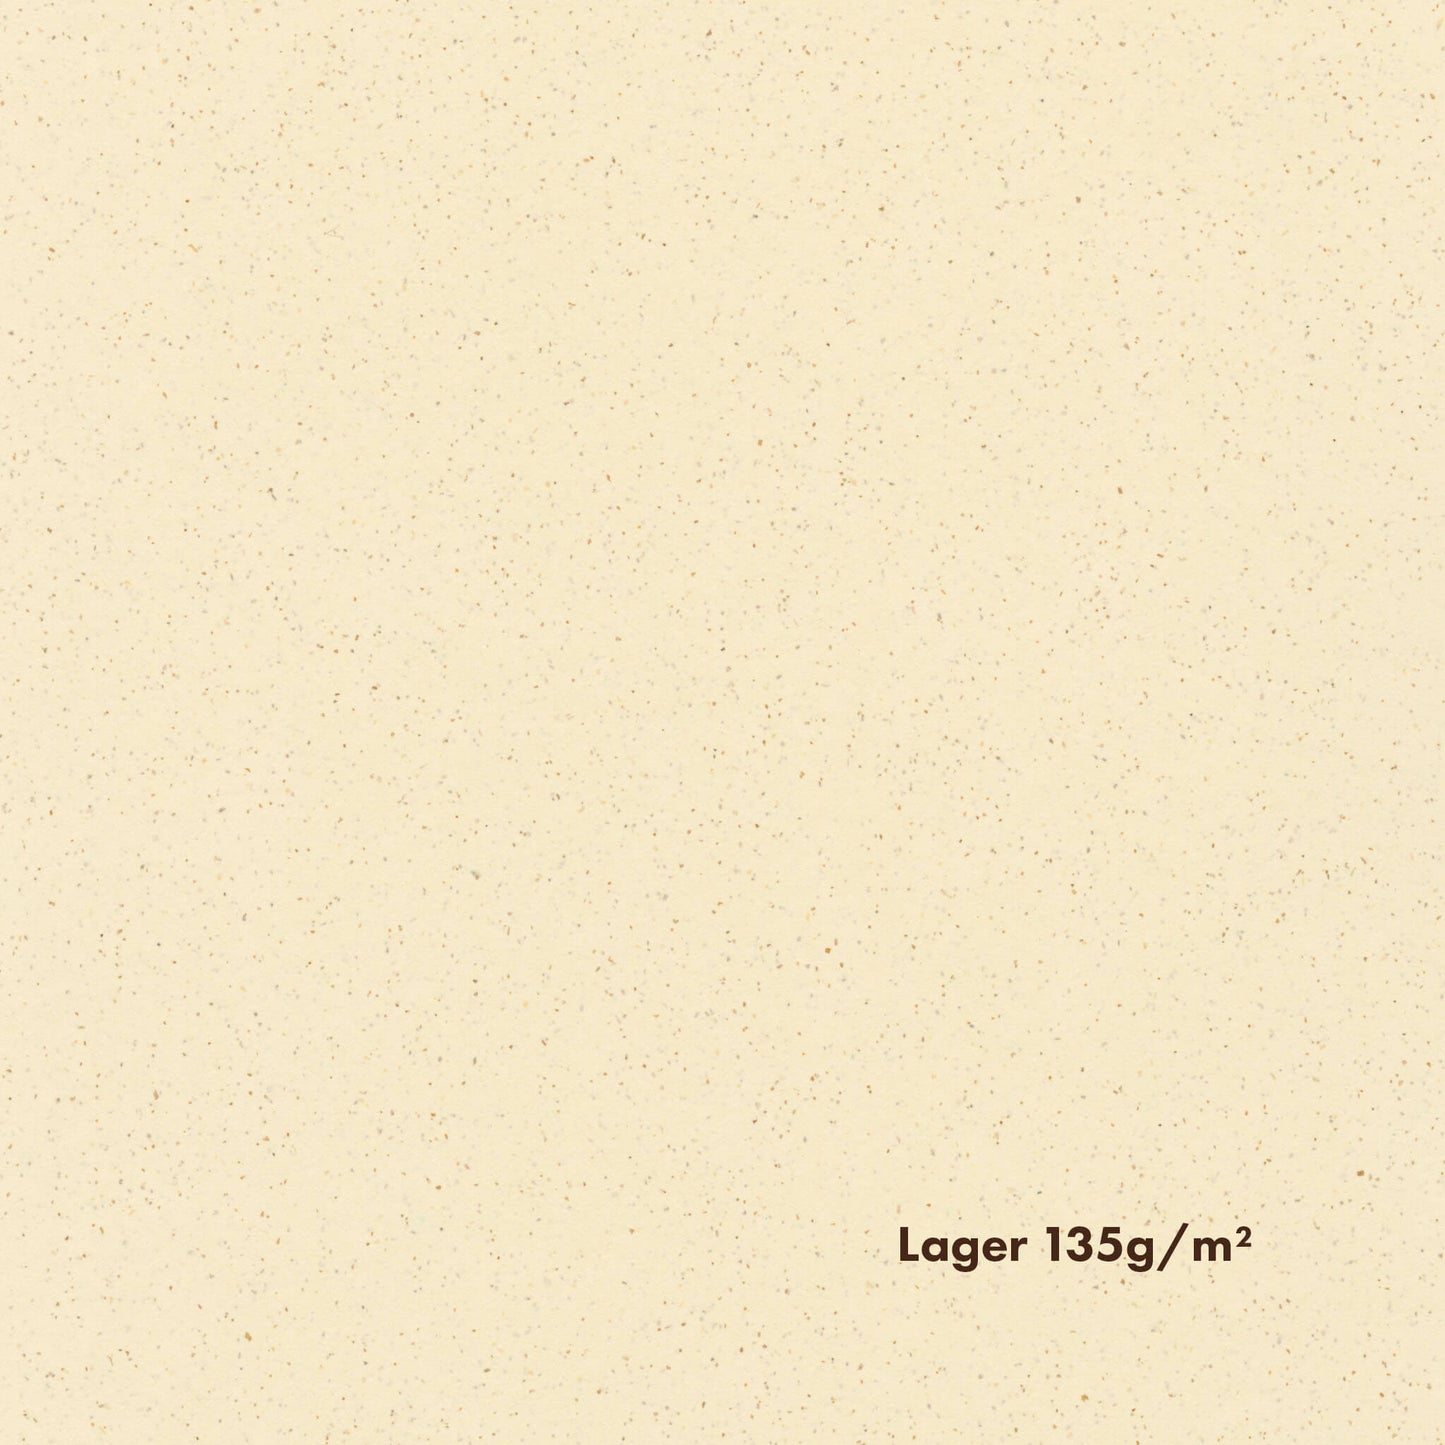 A detailed view of creamy-toned pulp paper, with a yellowish hue and noticeable brown speckles all over. Near the bottom, a text reads 'Lager 135g/m2'.